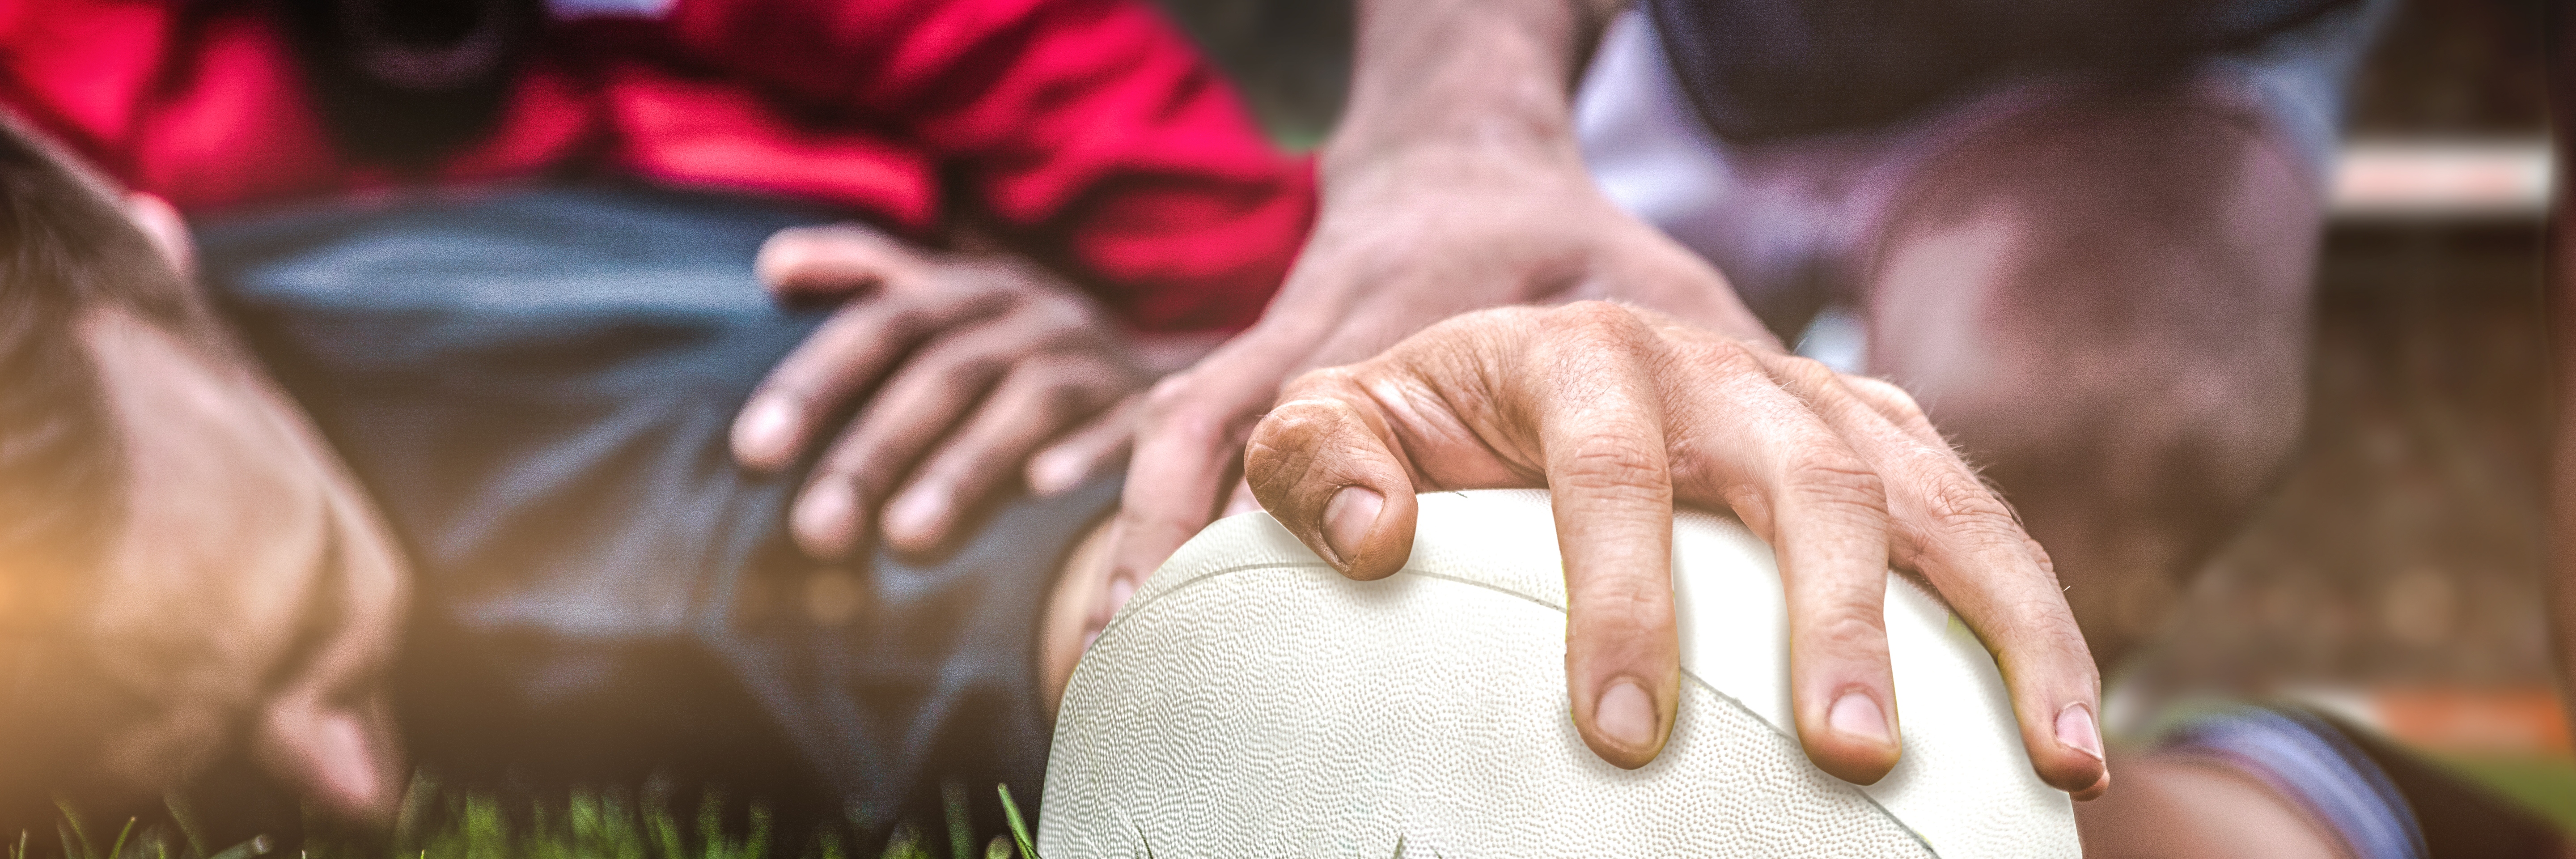 The Rugby World Cup: Tackling complex risks